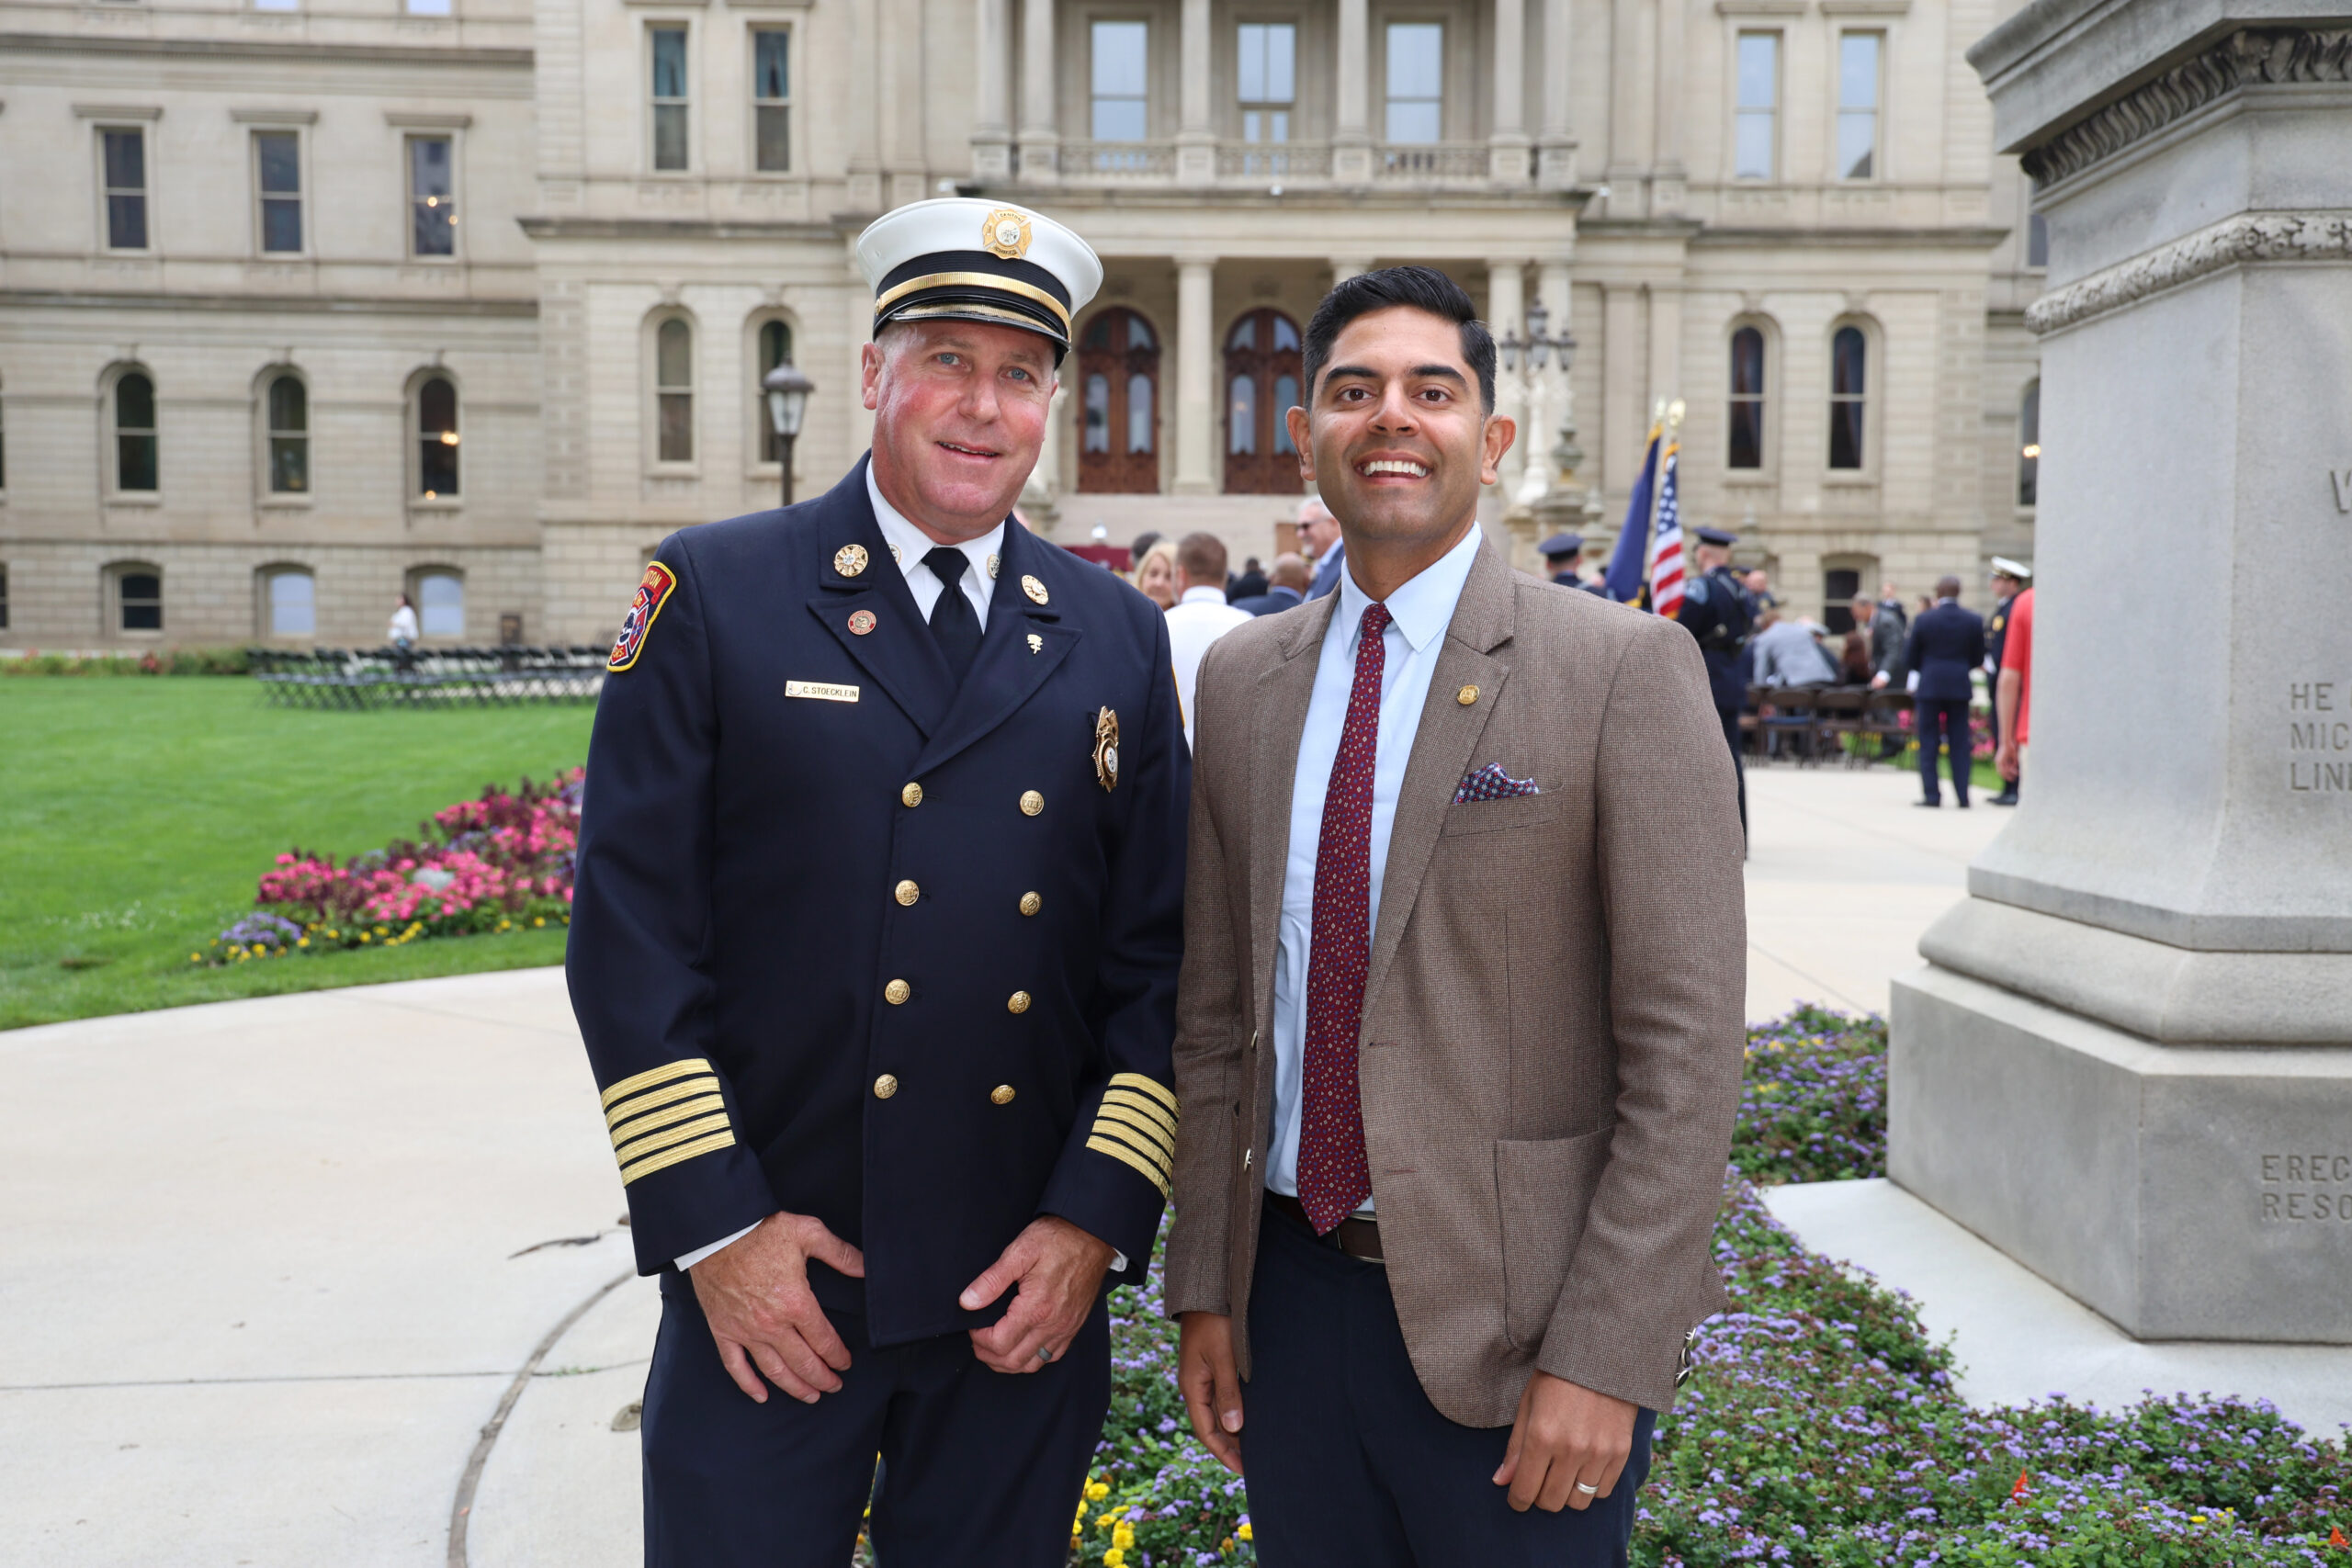 Rep. Puri stands with Canton Township Fire Chief Christopher Stoecklein on the Michigan Capitol lawn.